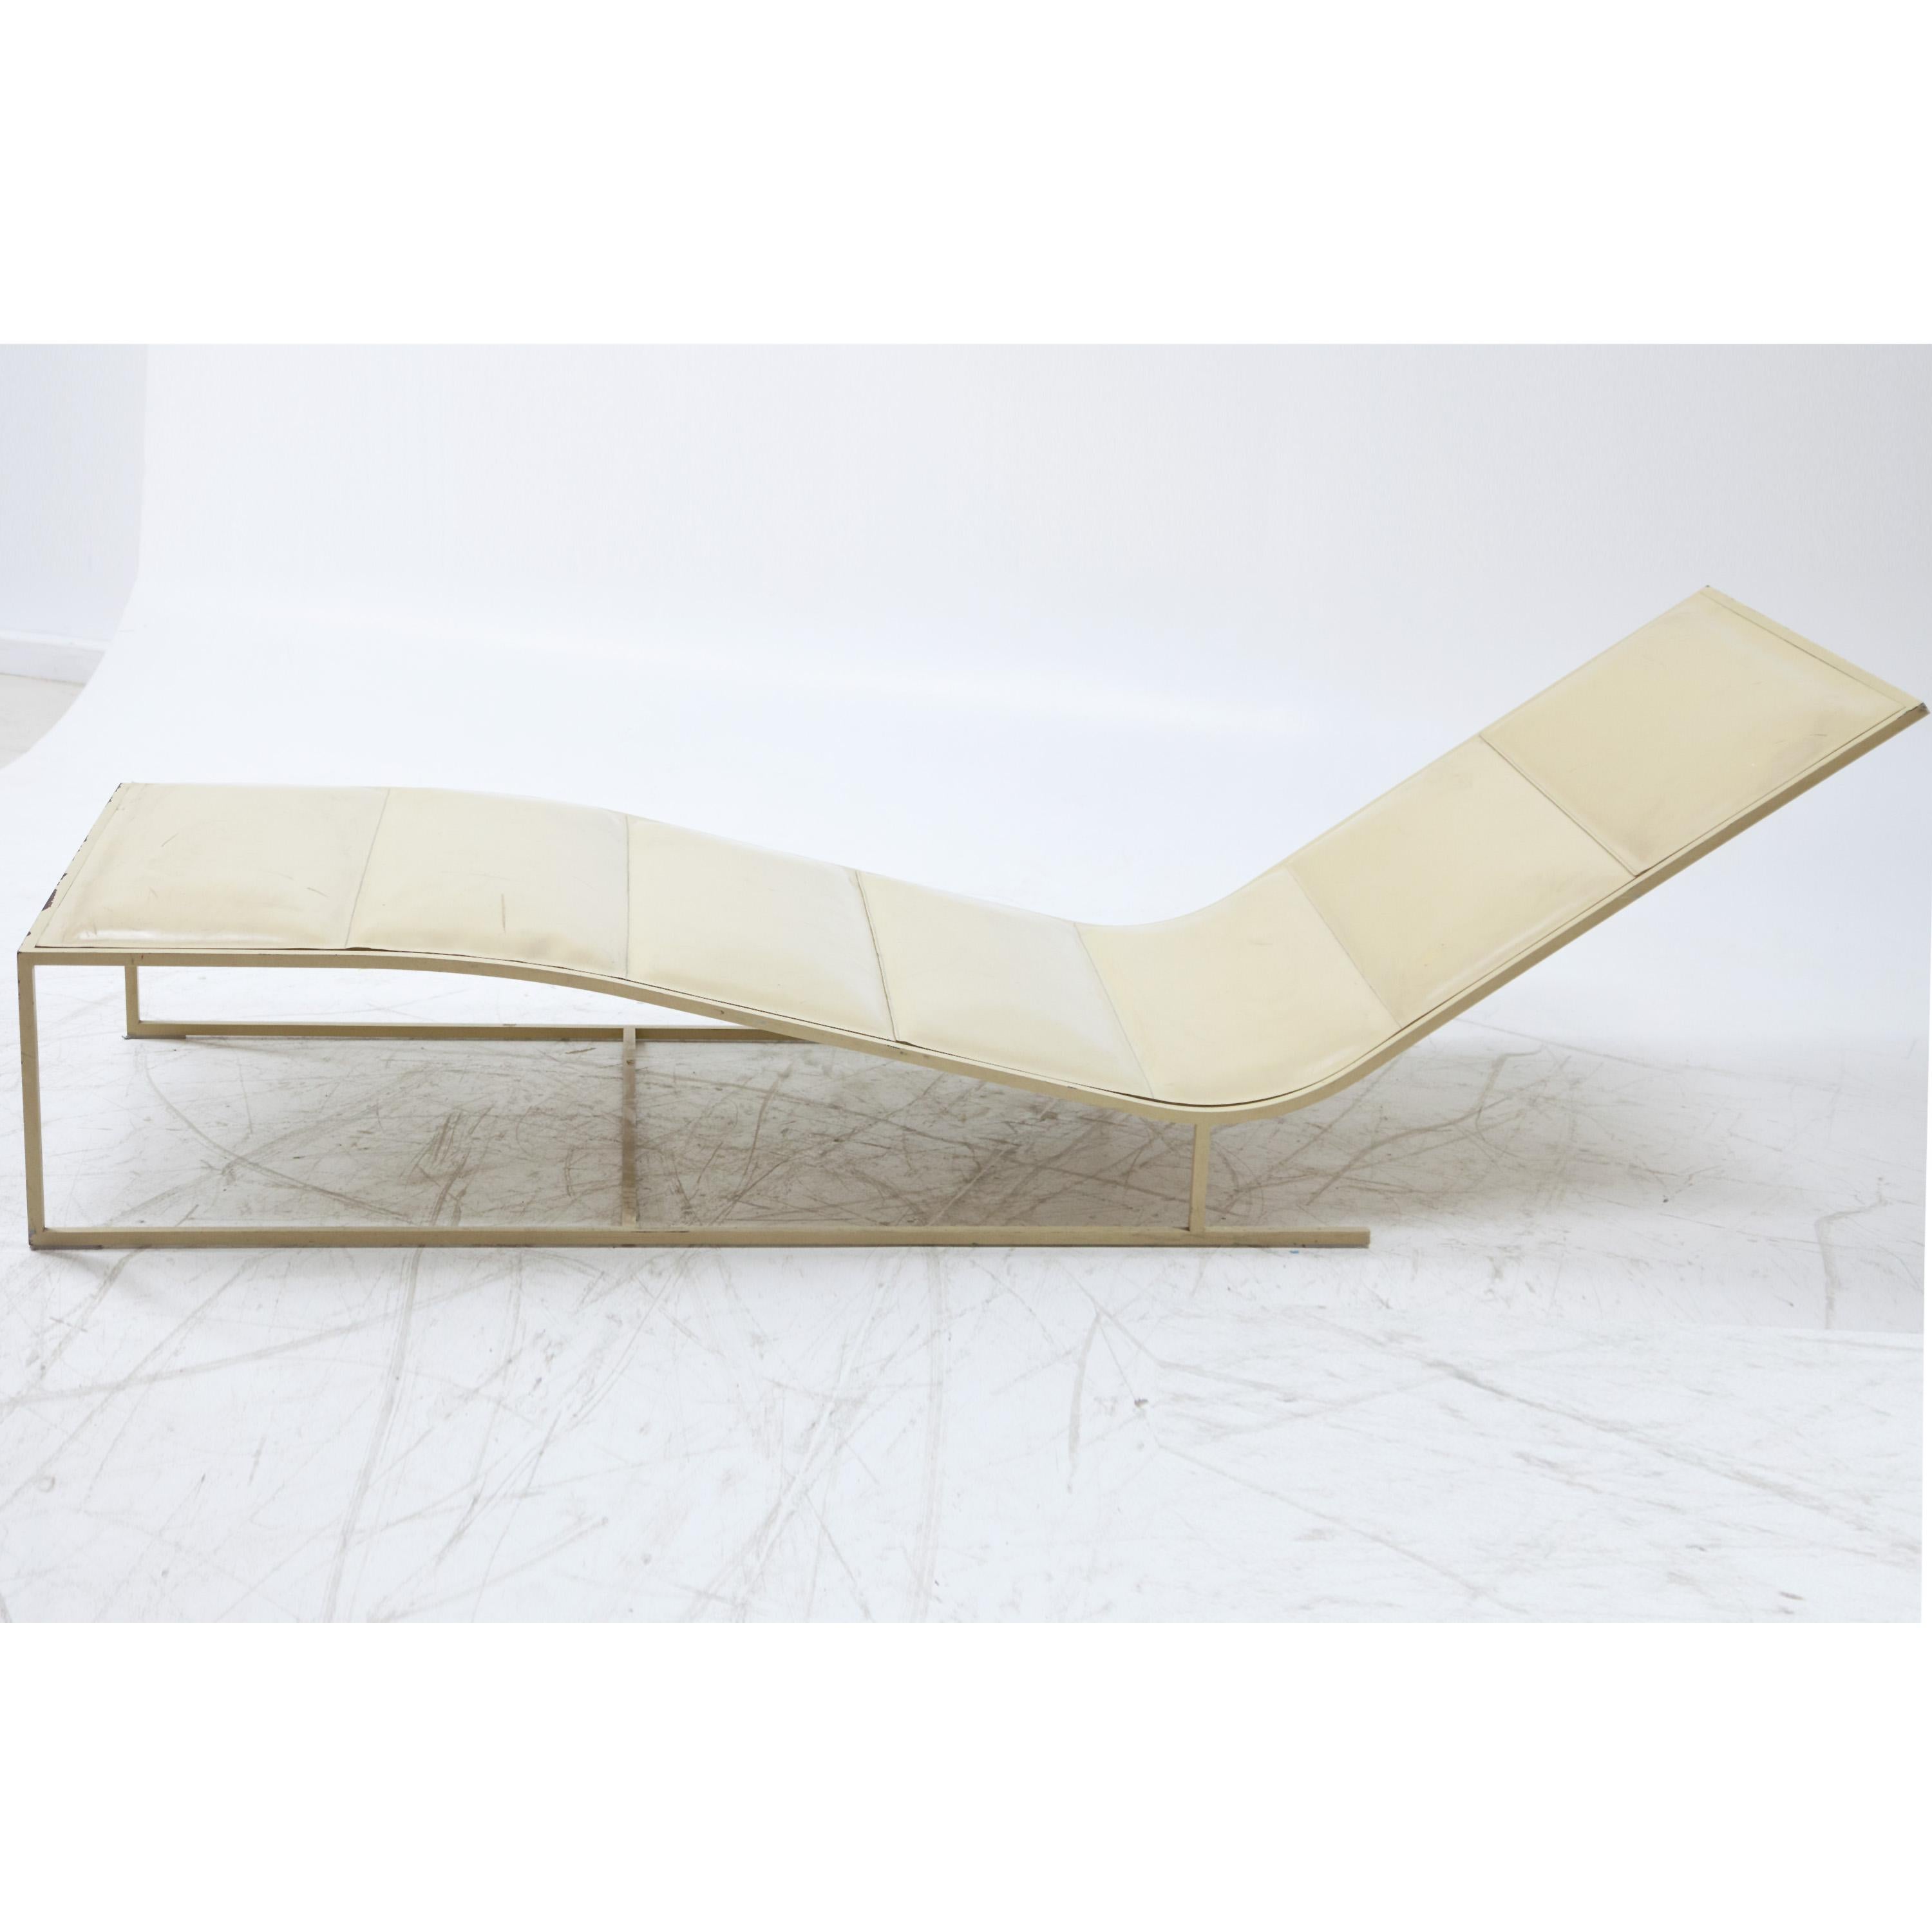 European Midcentury Design Metal and Leather Lounger For Sale